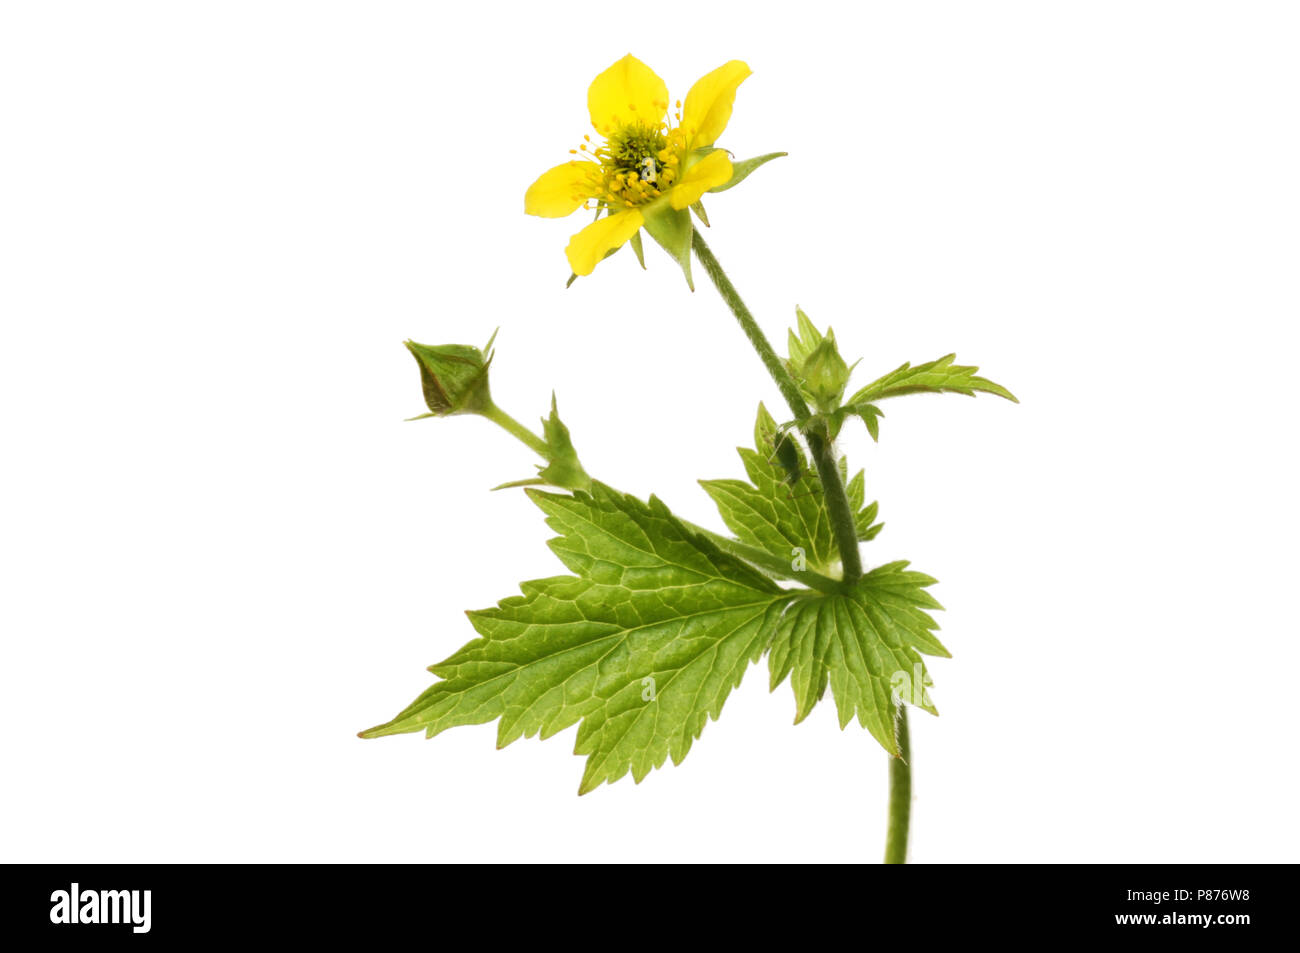 Herb Bennet, Geum urbanum, flower and foliage isolated against white Stock Photo